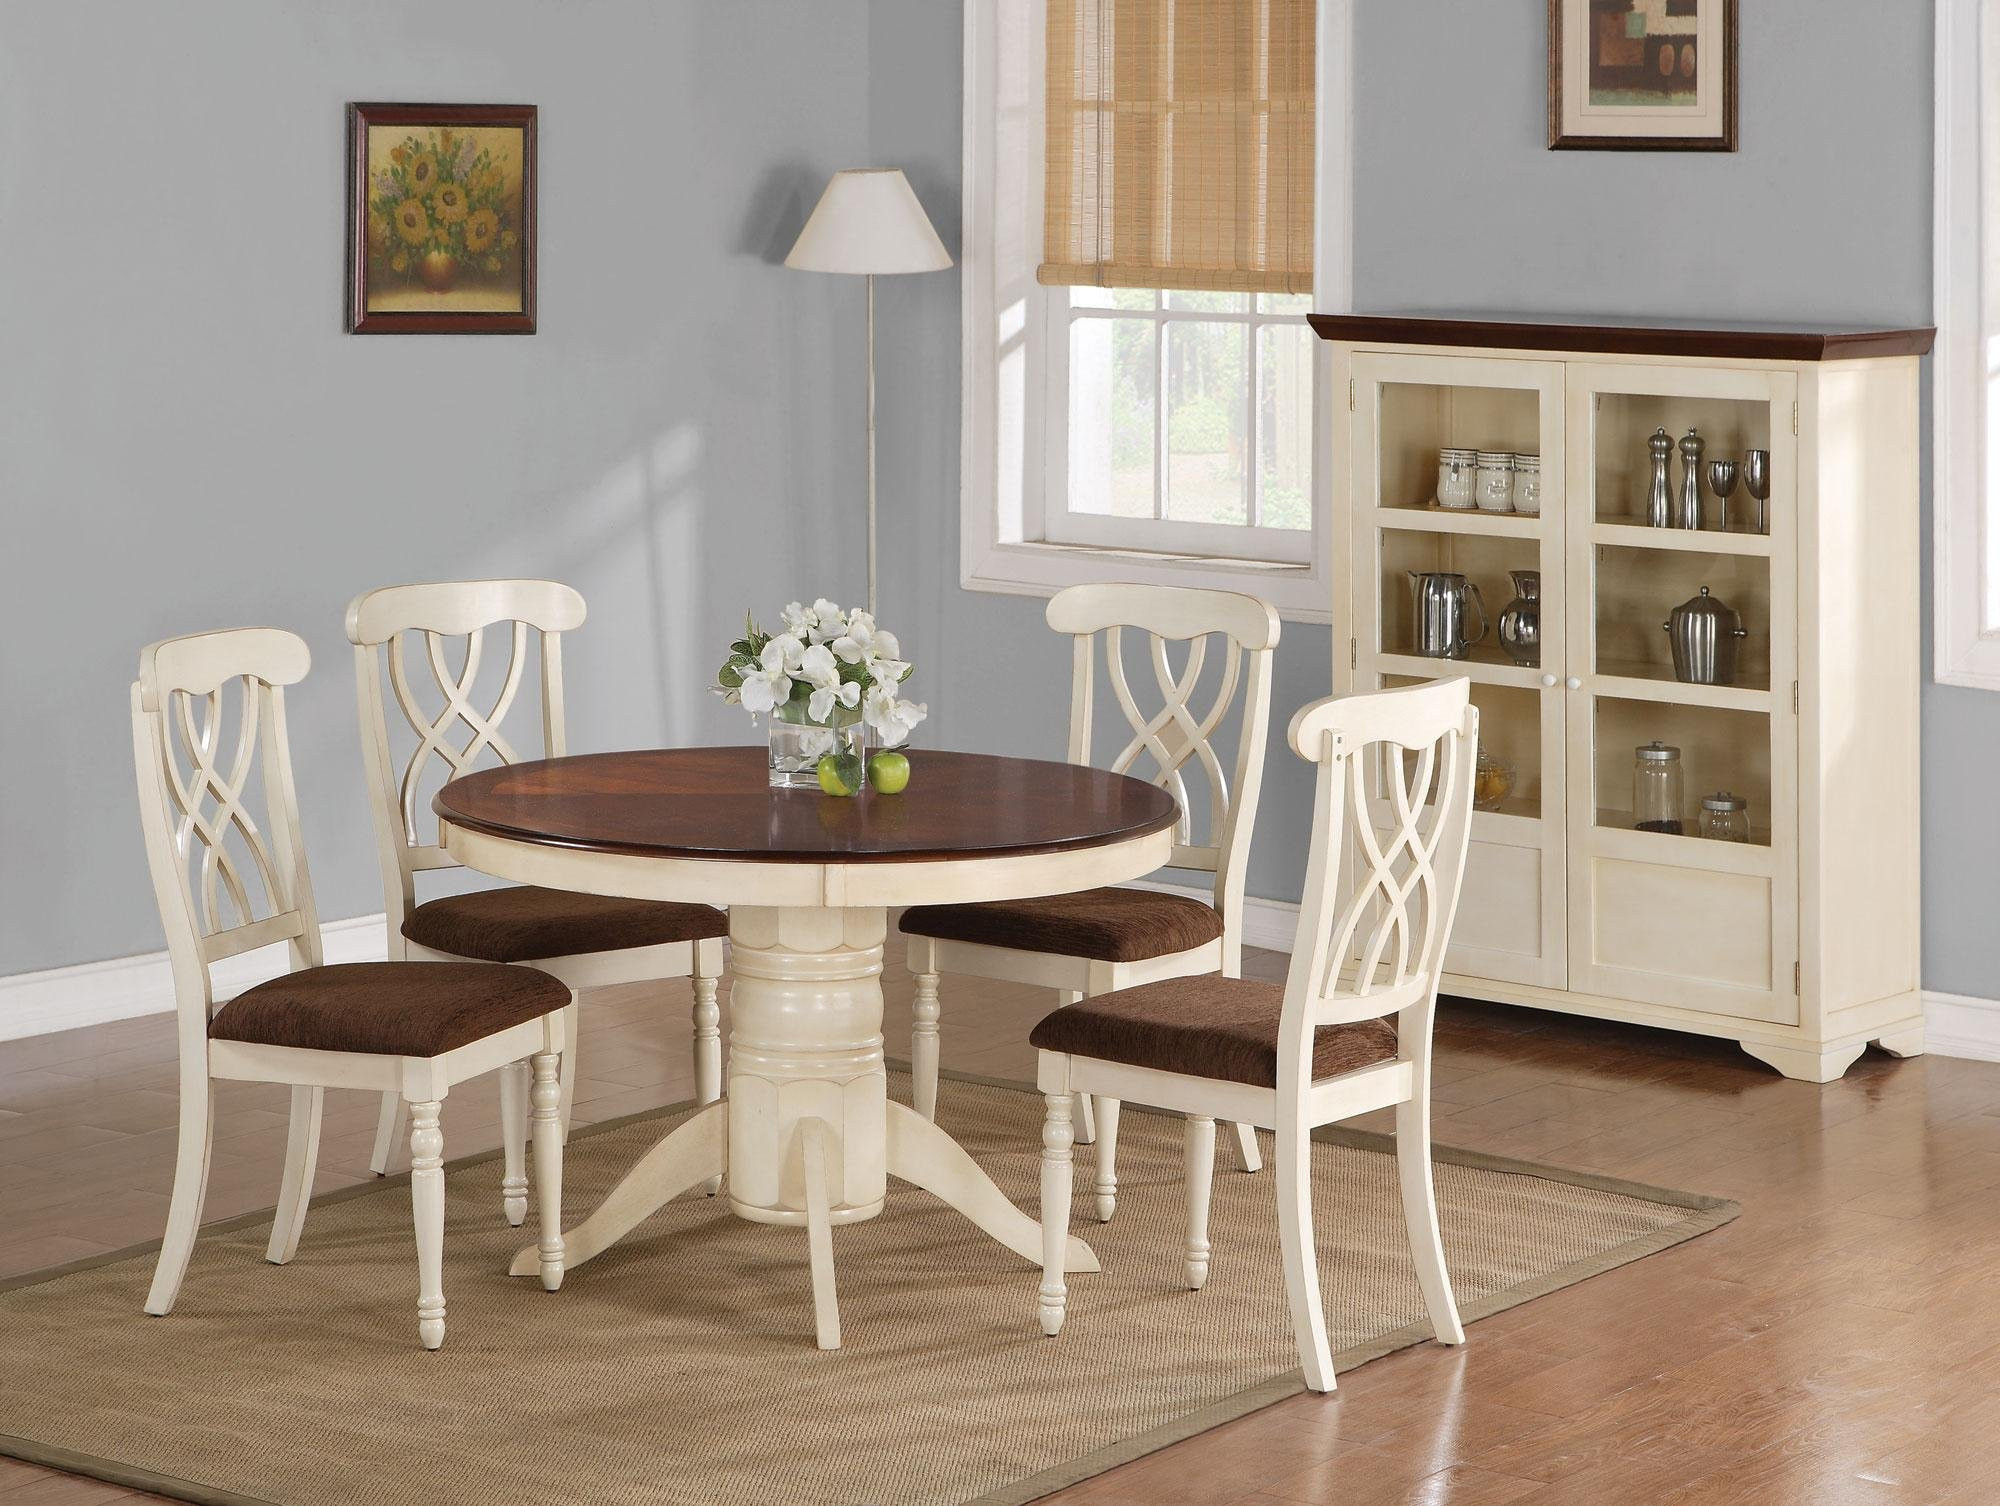 Kitchen Cabinet Table
 Beautiful White Round Kitchen Table and Chairs – HomesFeed